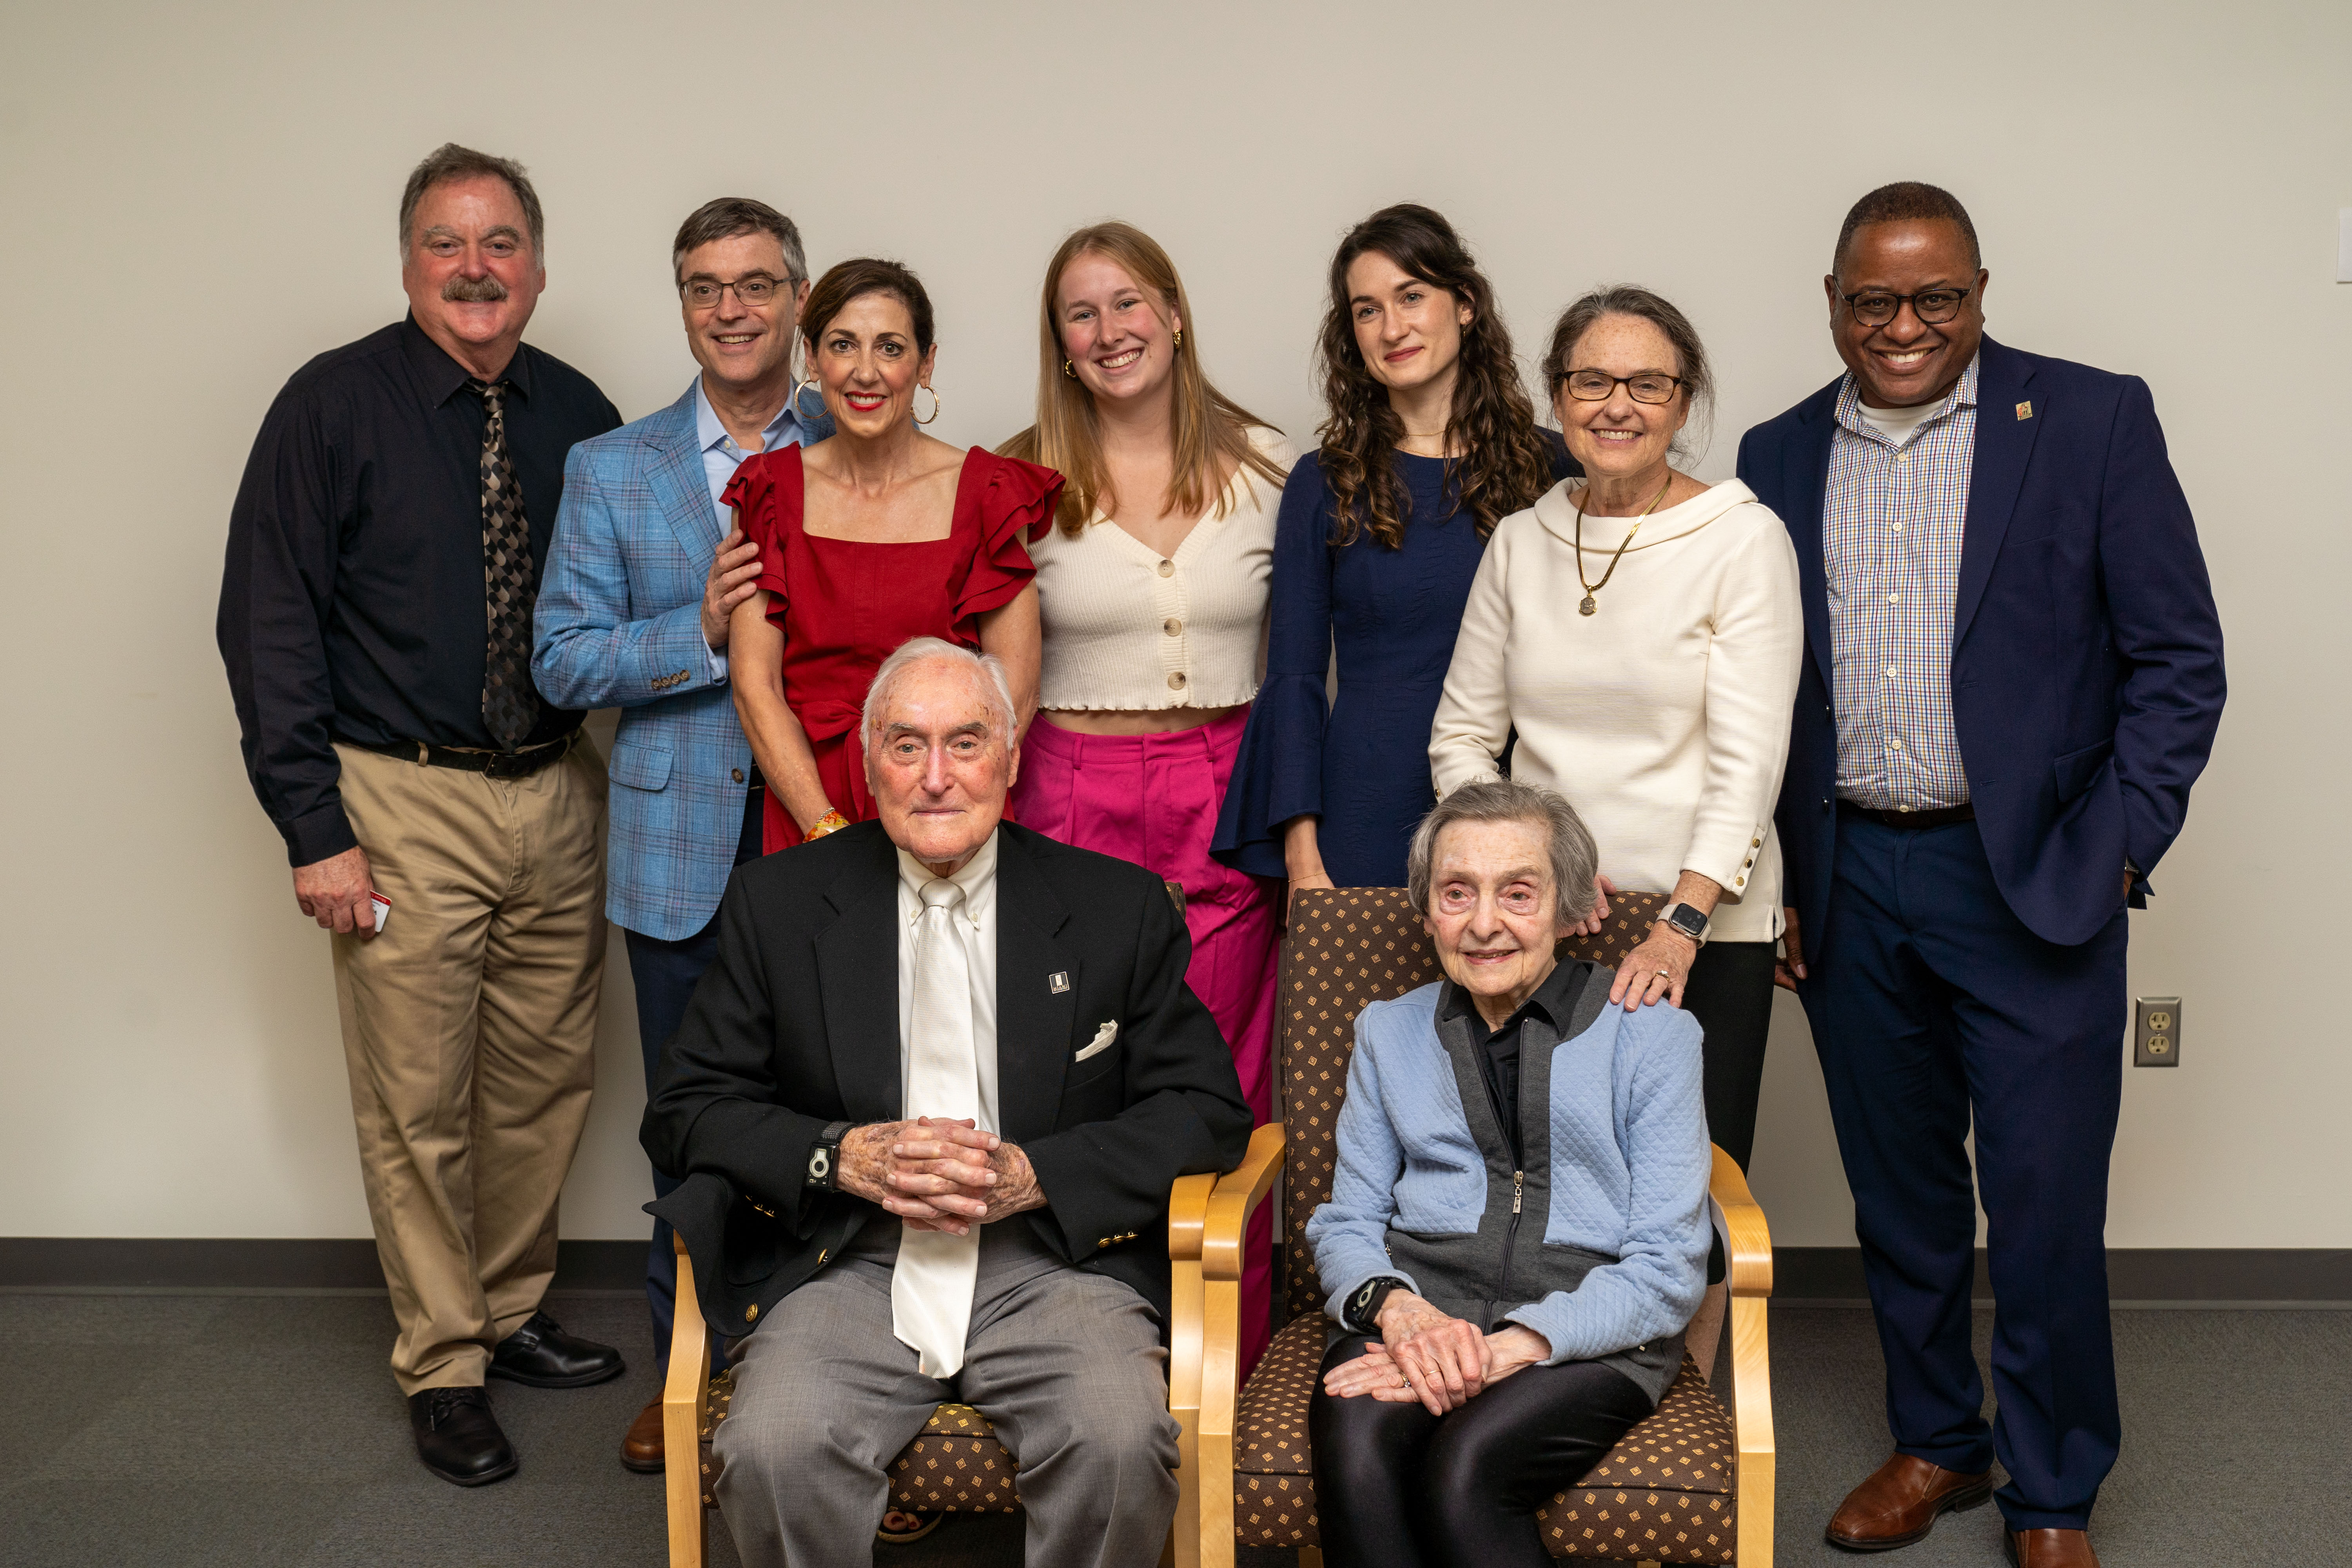 Nine people pose for a photo at King Library after the 50th anniversary of the naming of the Walter Havighurst Special Collections. The nine people include William Pratt and his family, as well as Jerome Conley, Dean of the Libraries, and William Modrow, head of the Steward and Sustain department.